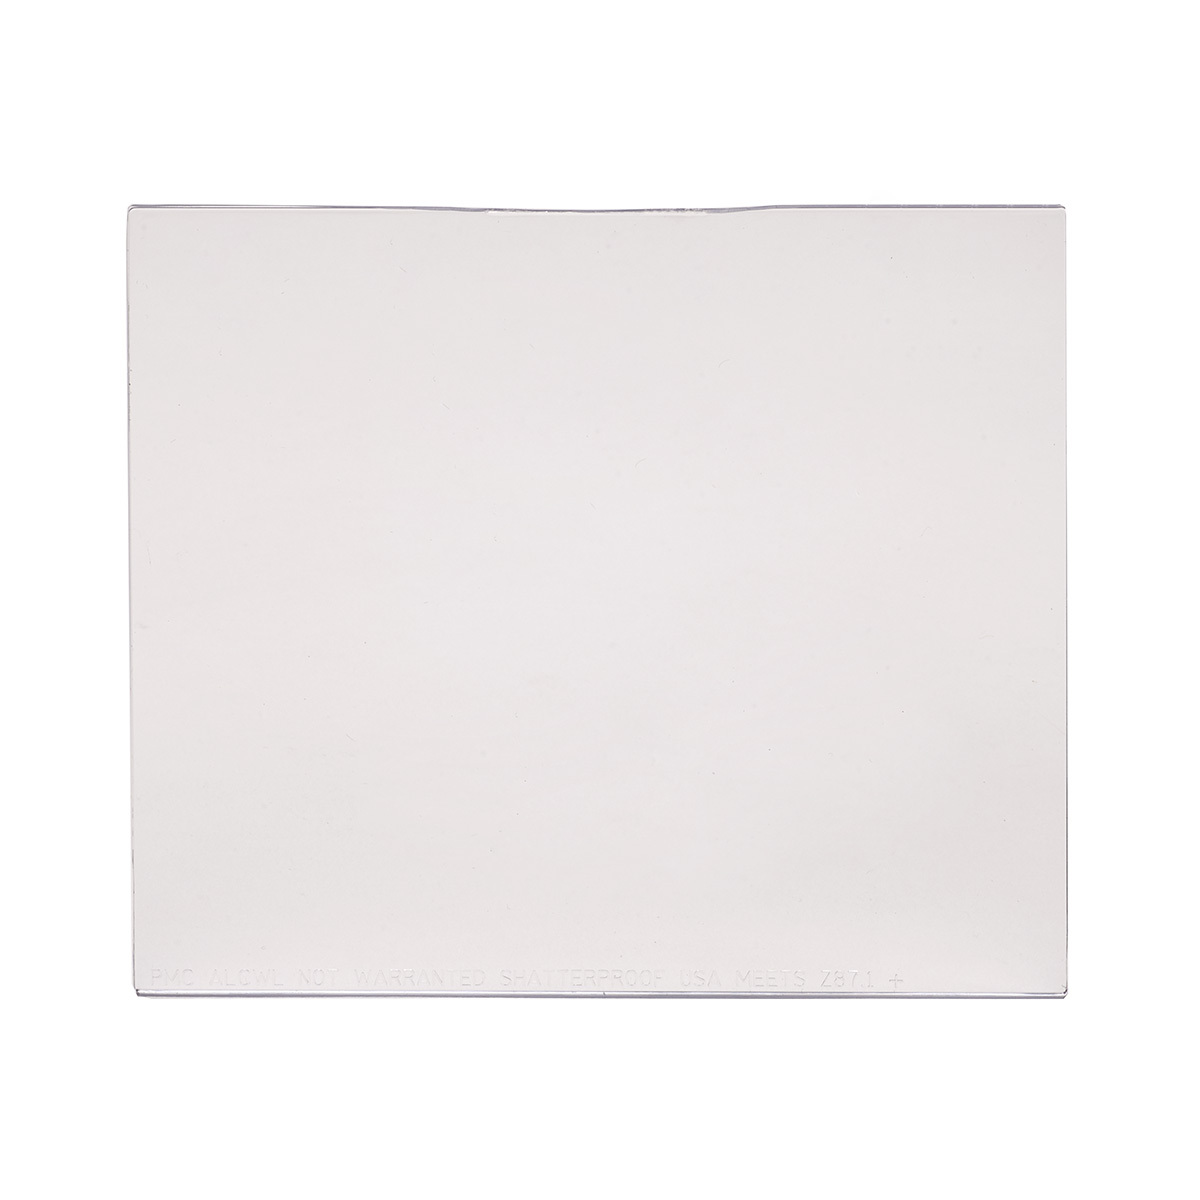 MSA Sightgard Clear Polycarbonate Outside Cover Plate